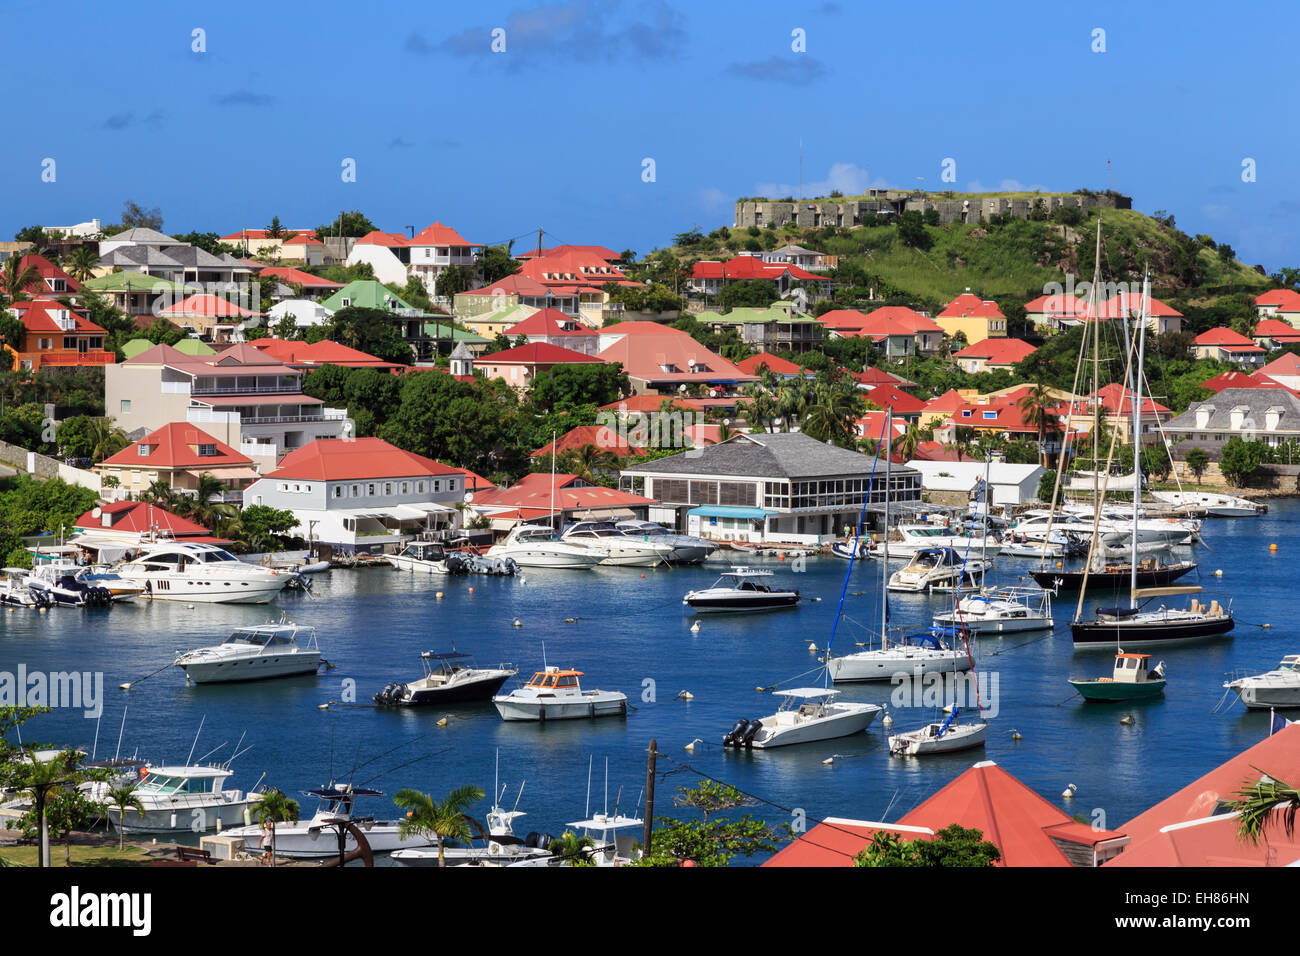 Elevated view of harbour, Gustavia, St. Barthelemy (St. Barts) (St. Barth),  West Indies, Caribbean, Central America